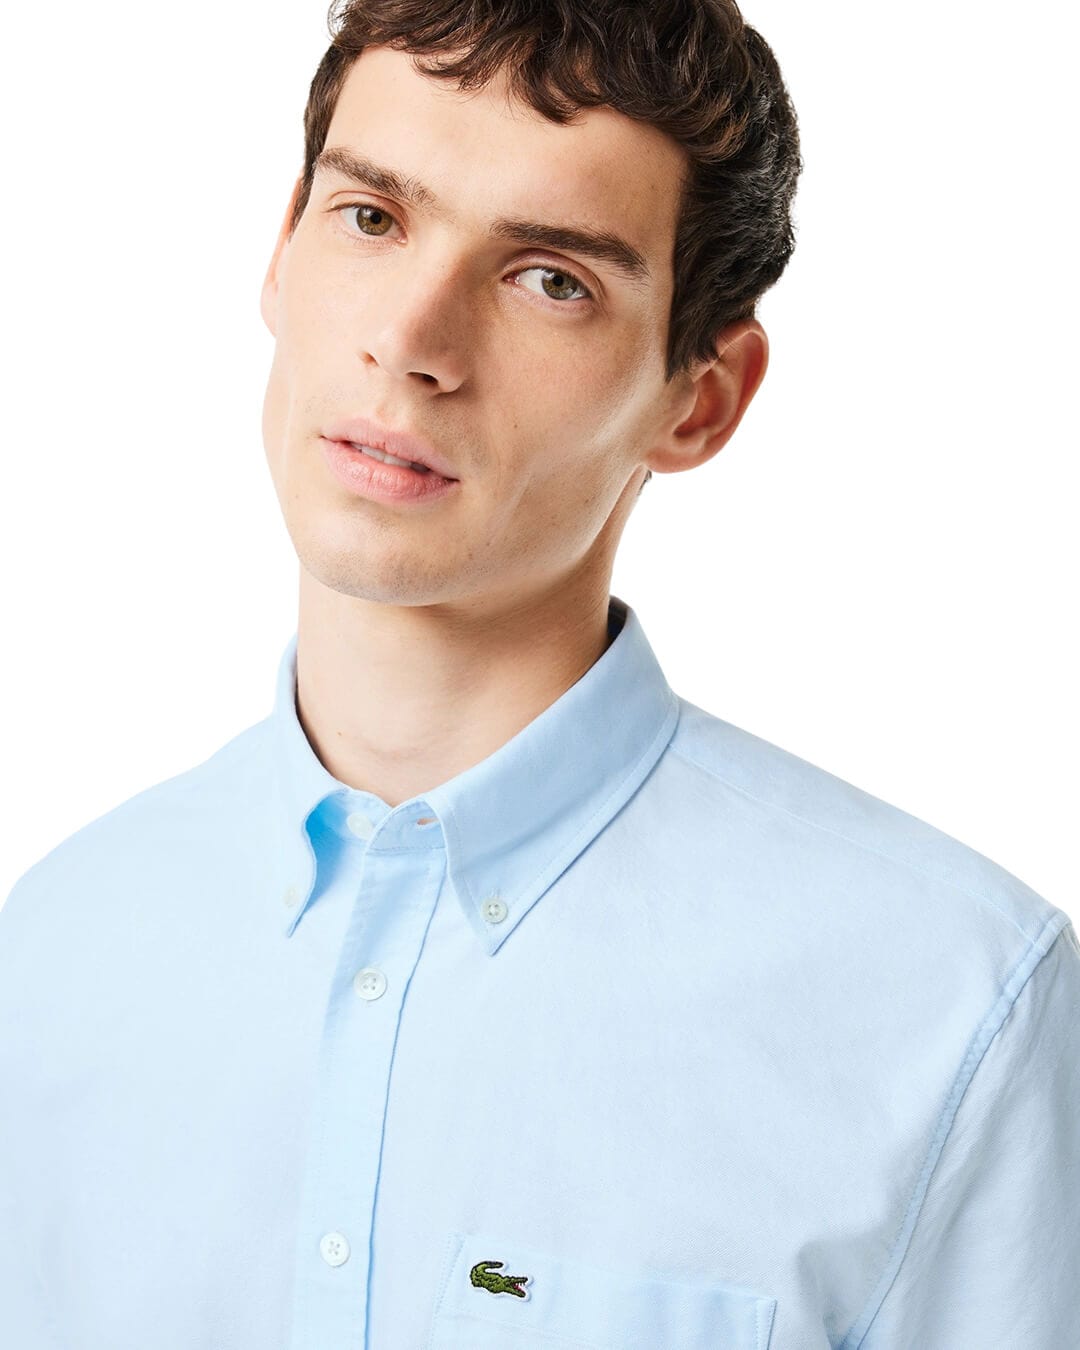 Lacoste Shirts Lacoste Regular Fit Short Sleeved Oxford Blue Shirt